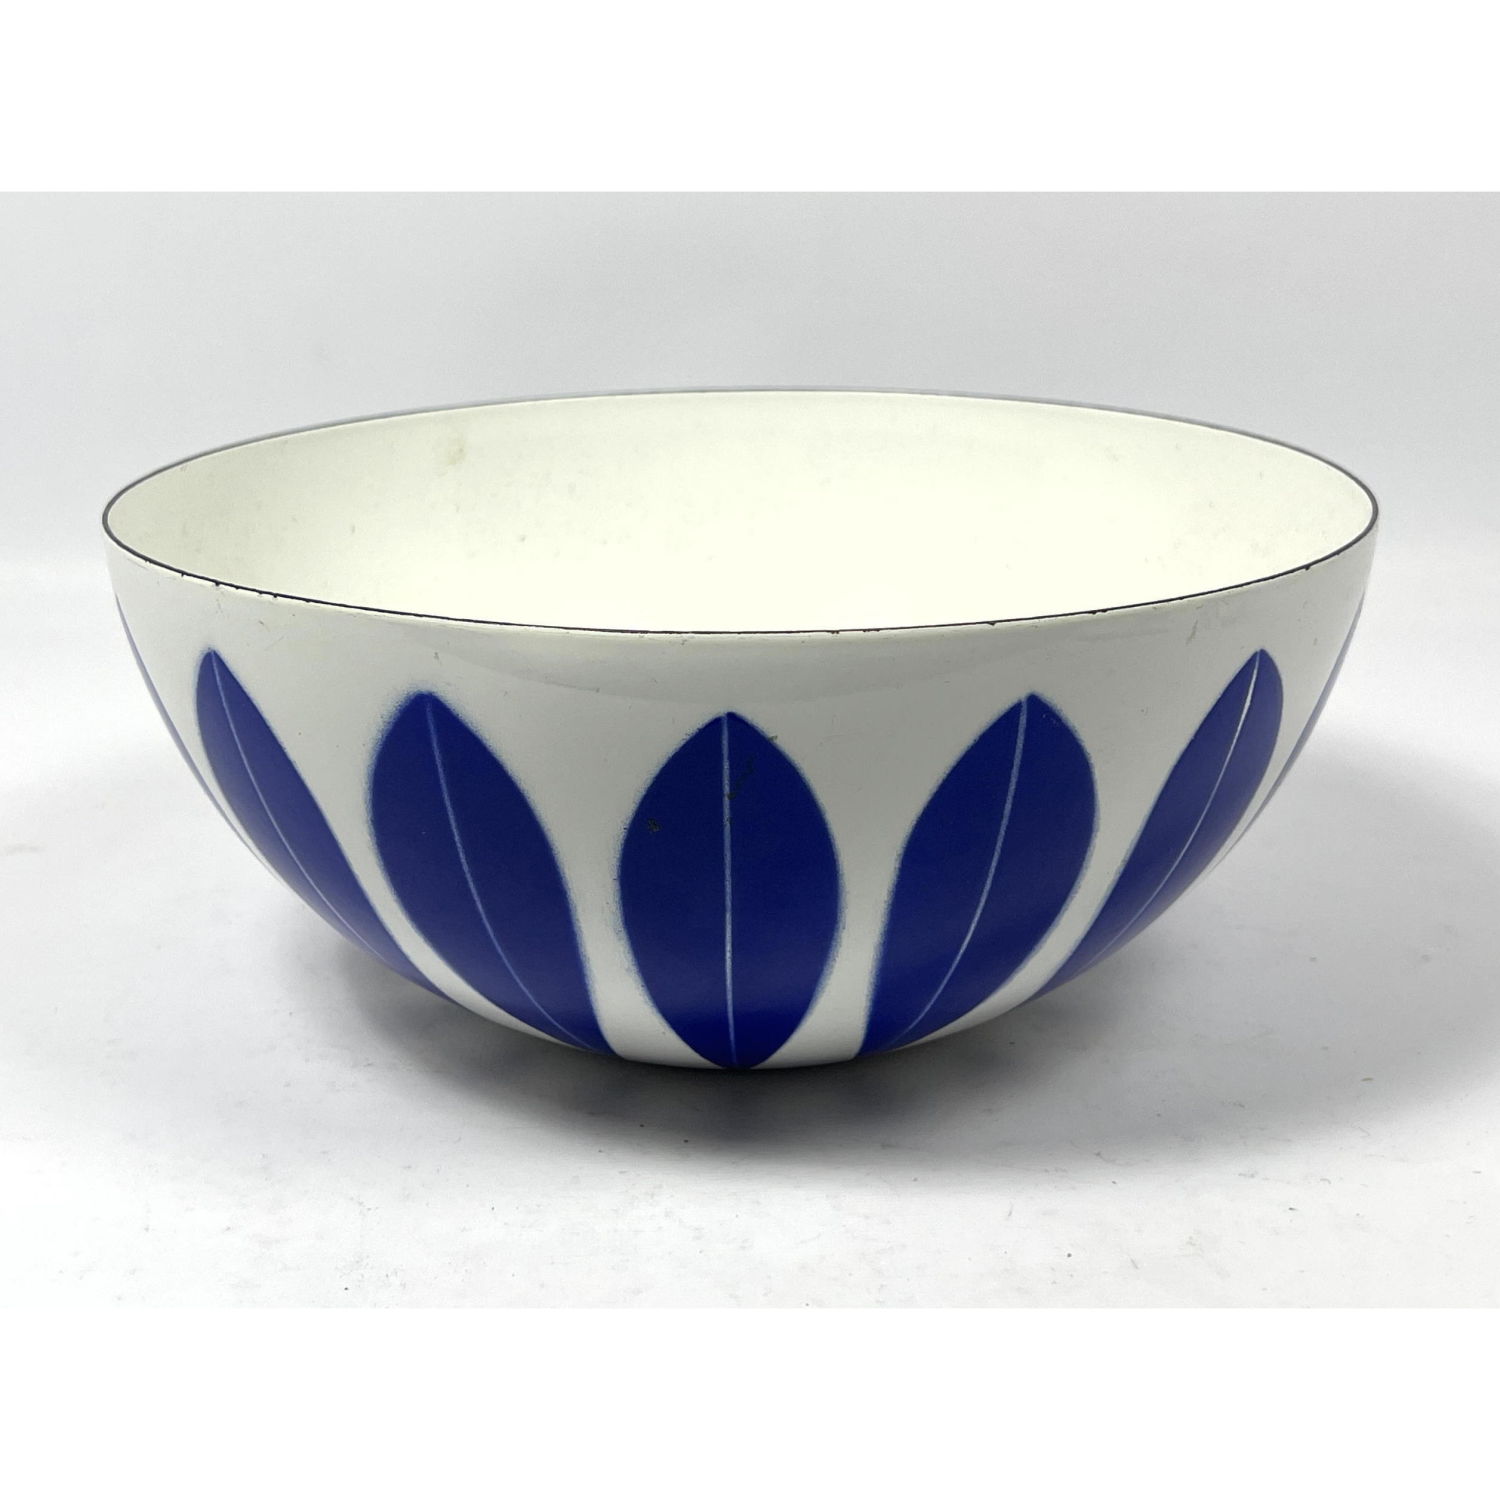 Blue and White CATHRINE HOLM Enamel 2ff70a